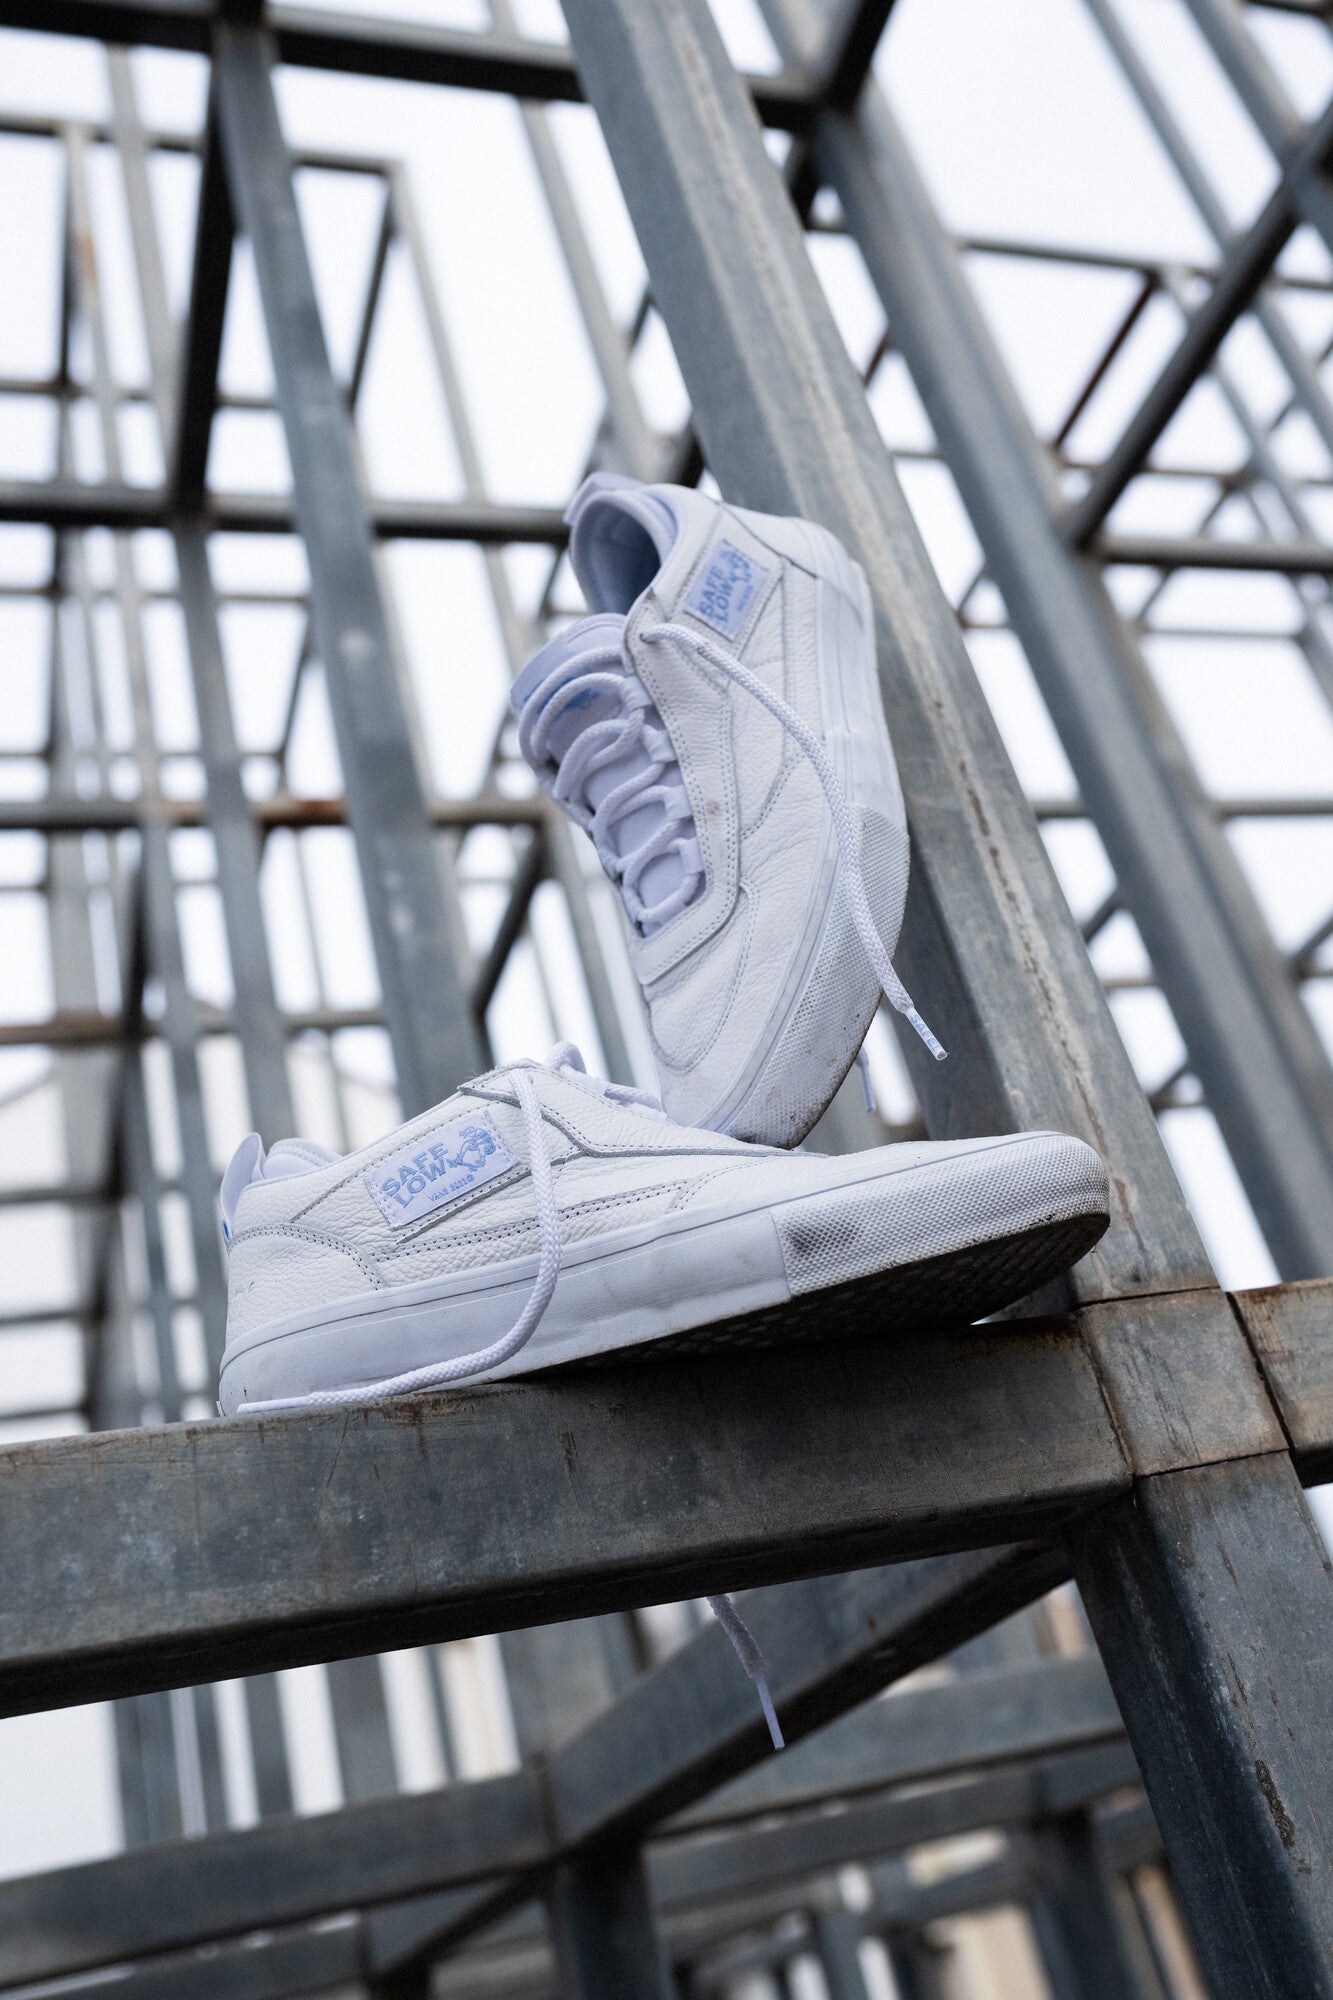 Vans - Safe Low Rory - White Leather